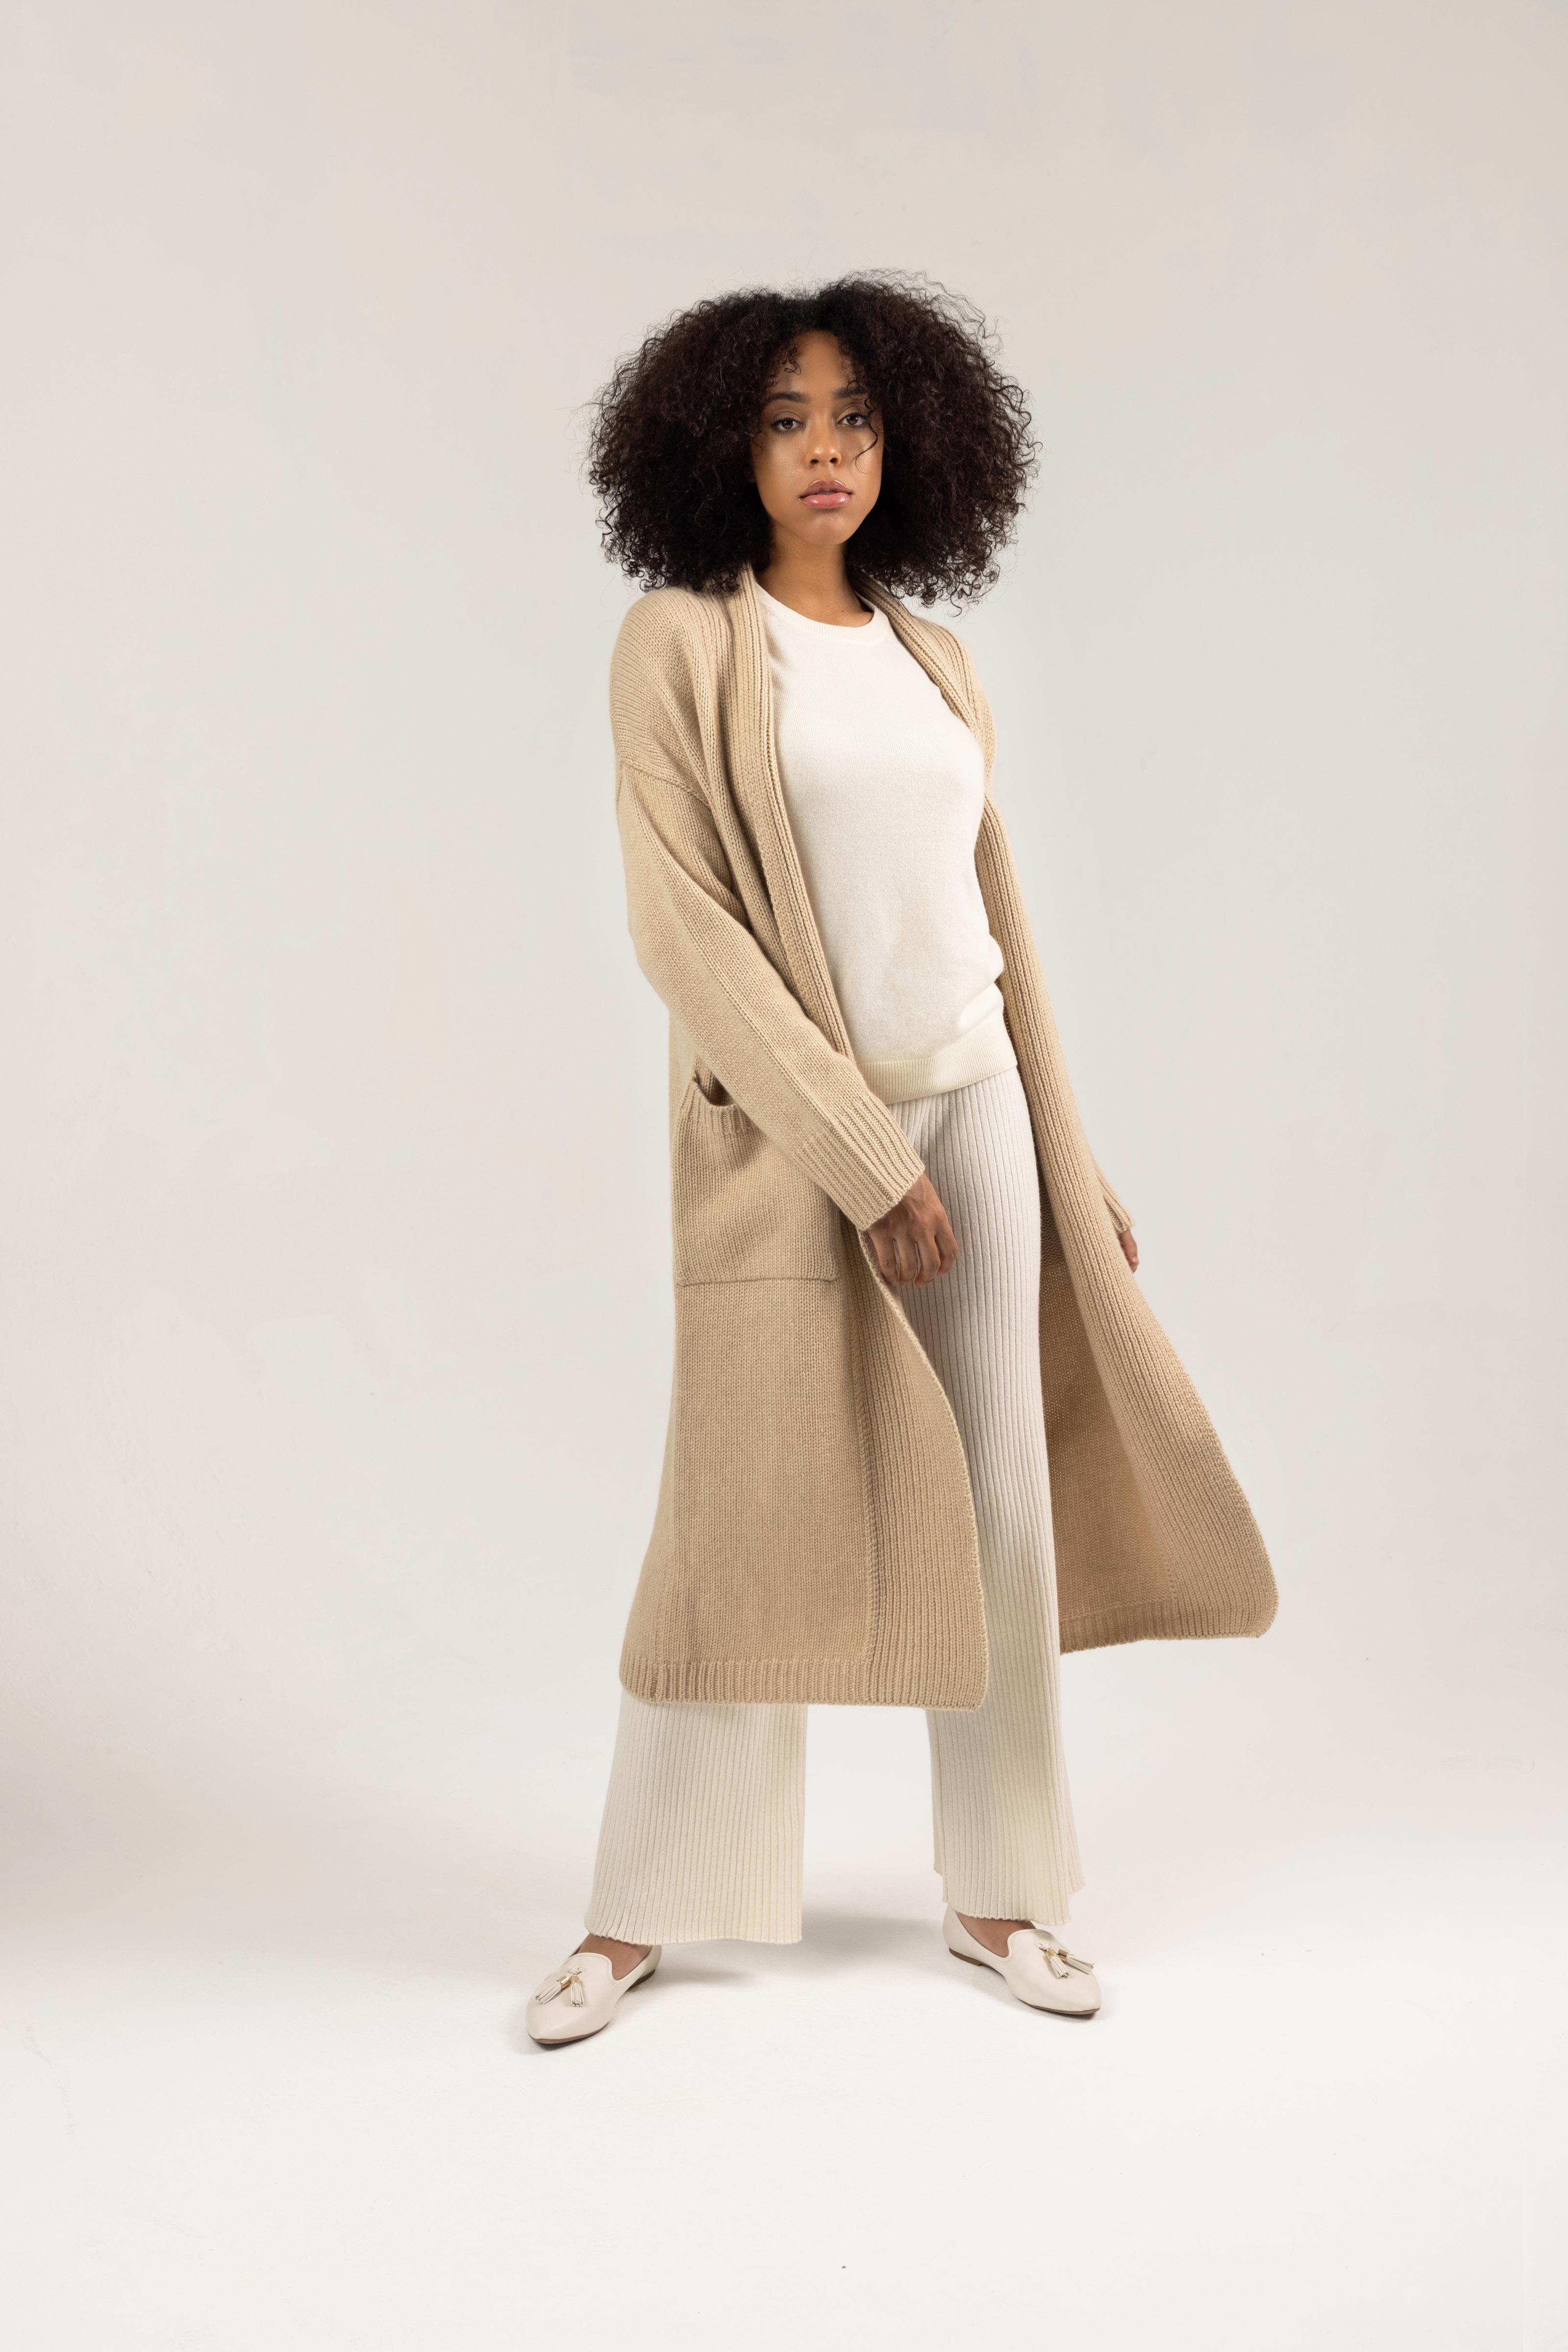 Gobi Cashmere Cashmere Chunky Long Cardigan in Beige (Natural) - Lyst